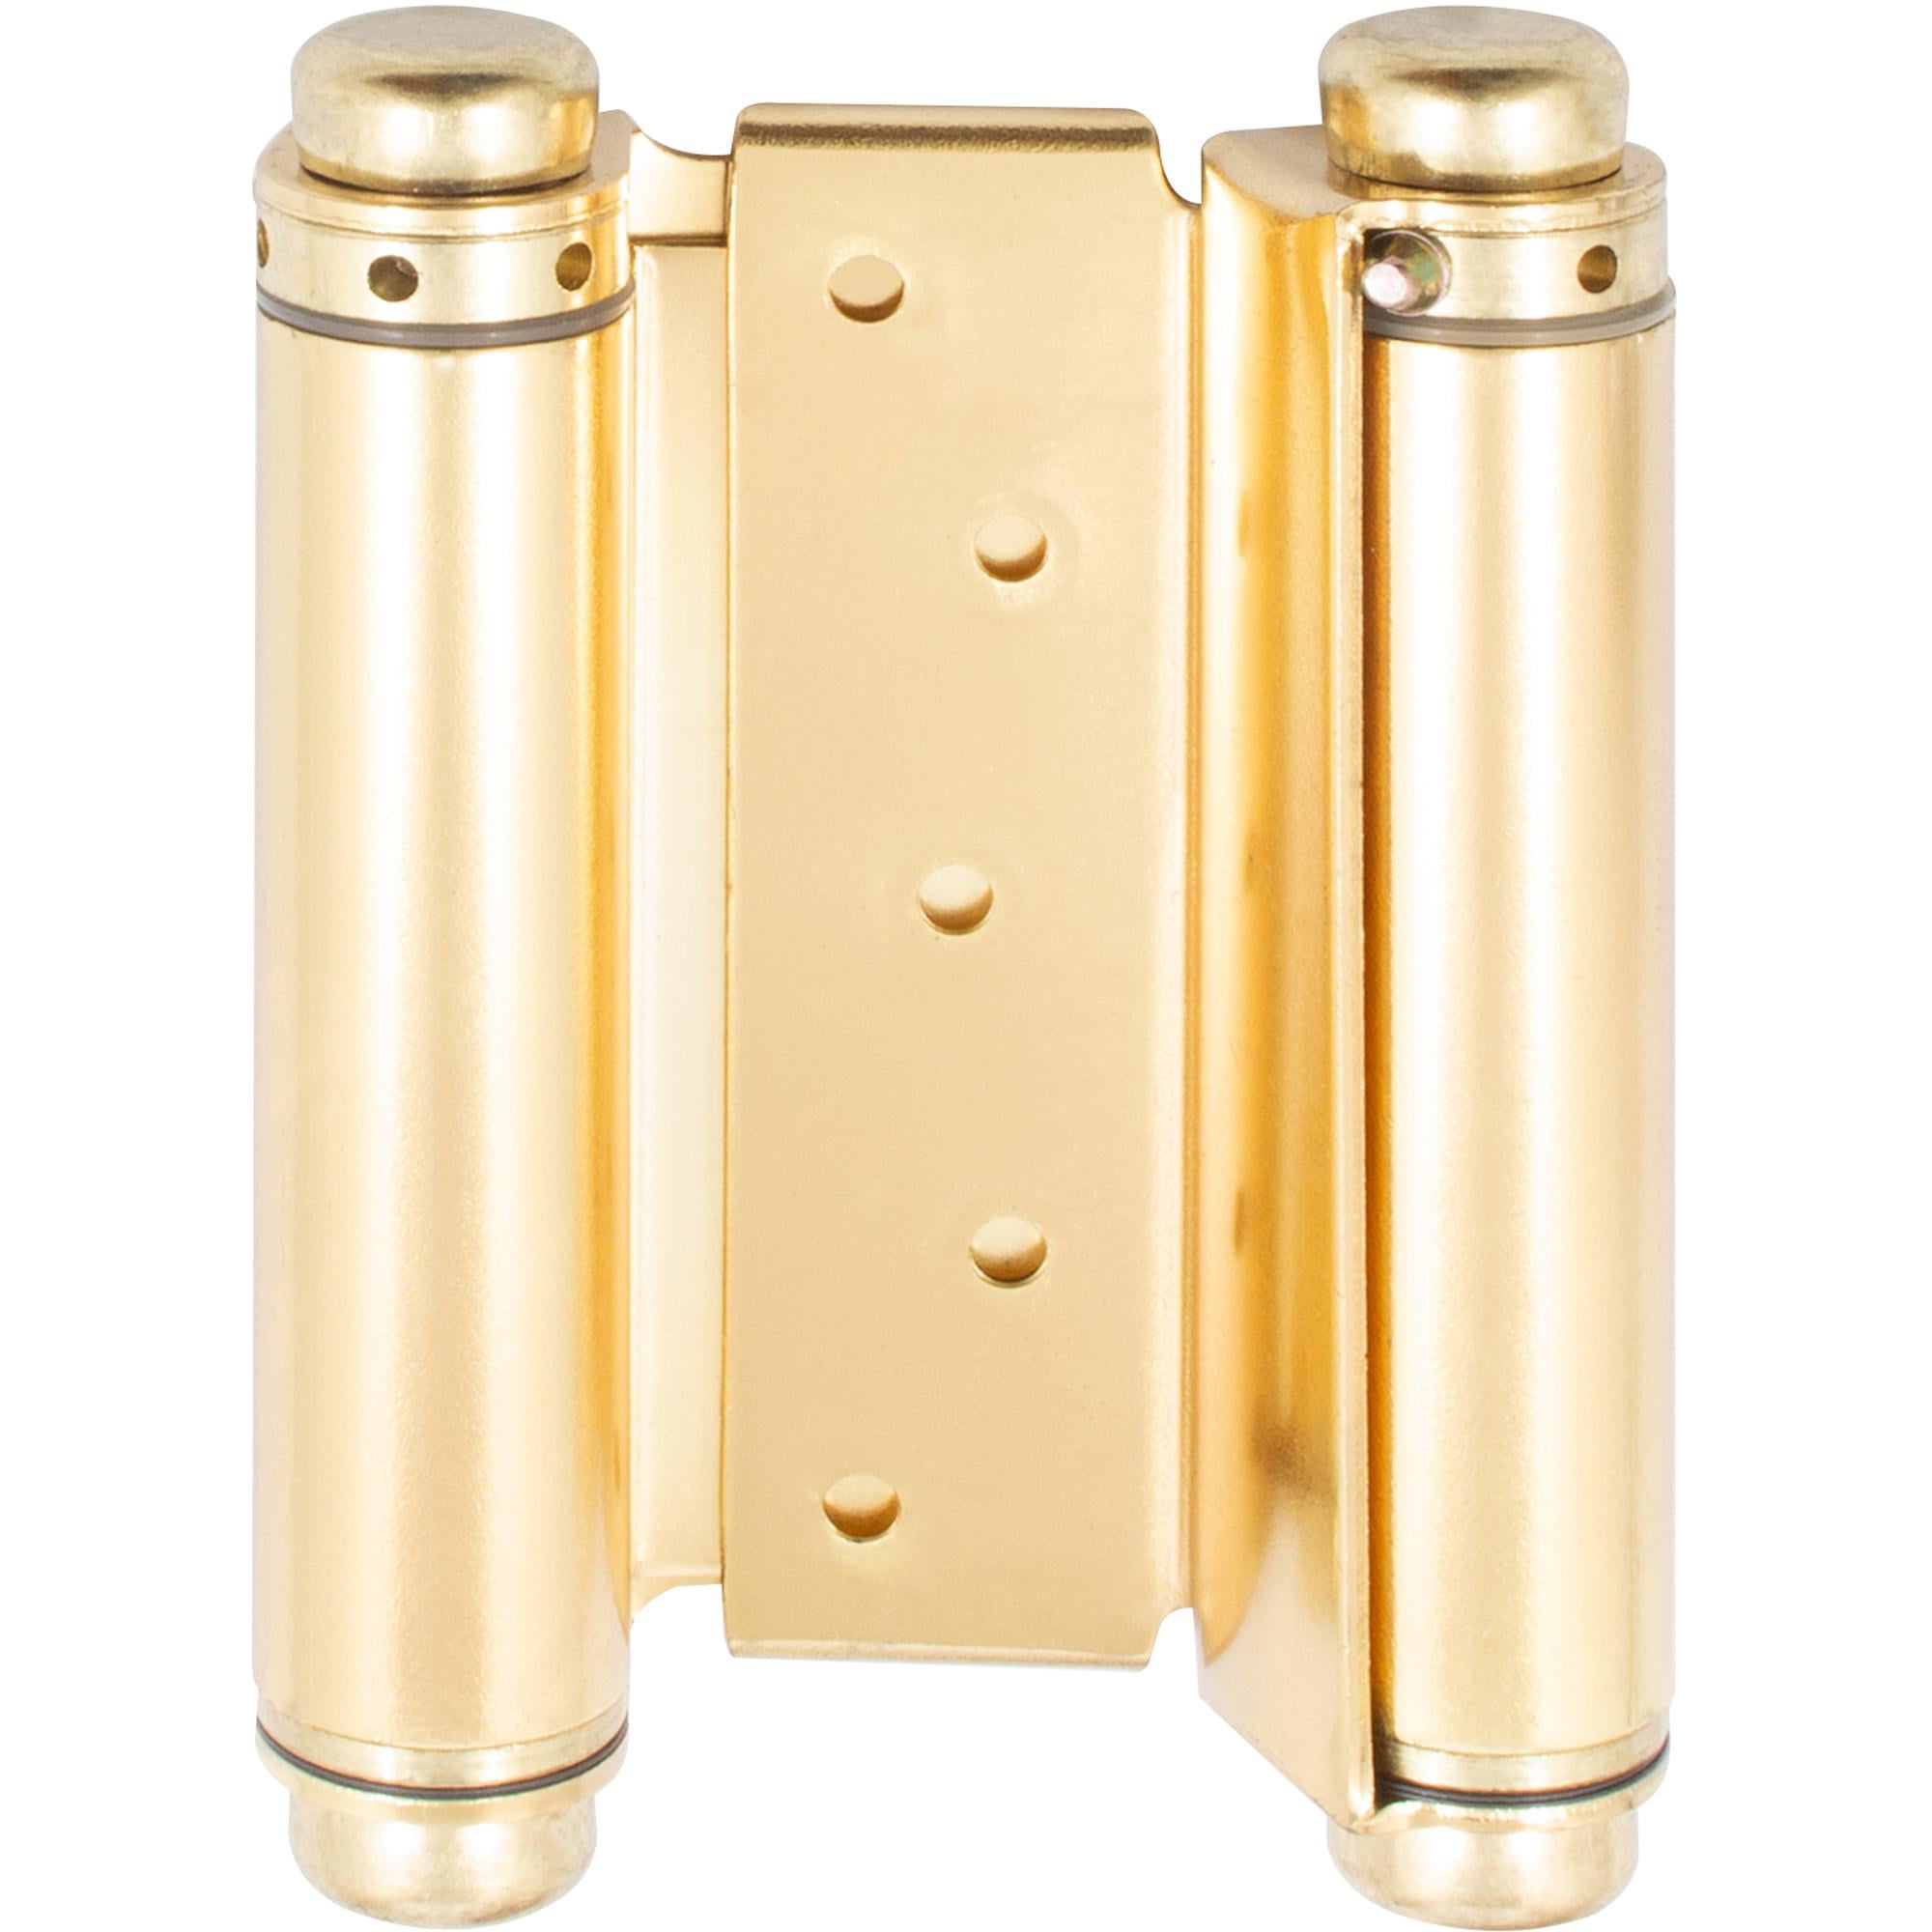 Heavy-Duty Double Acting Spring Hinge, 5 Inches, Fits Doors 1-1/8 to 1-3/8  Thick, 1-Pack, Polished Brass by Stone Harbor Hardware 